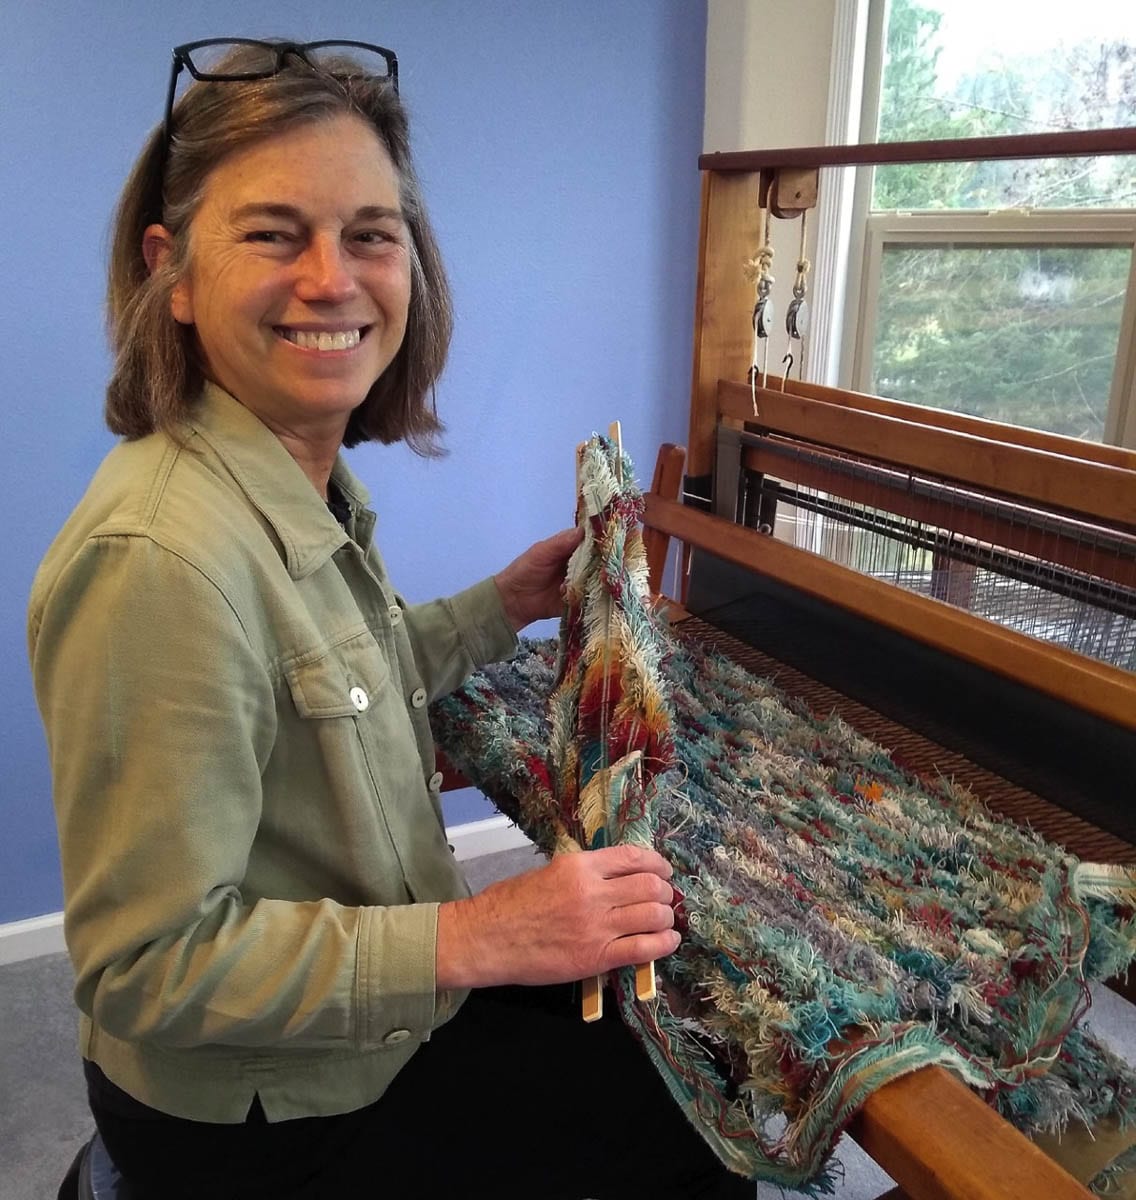 Kathy Marty of Windy Hills Weaving is excited to help get the word out about Artists Sunday. Photo courtesy Kathy Marty